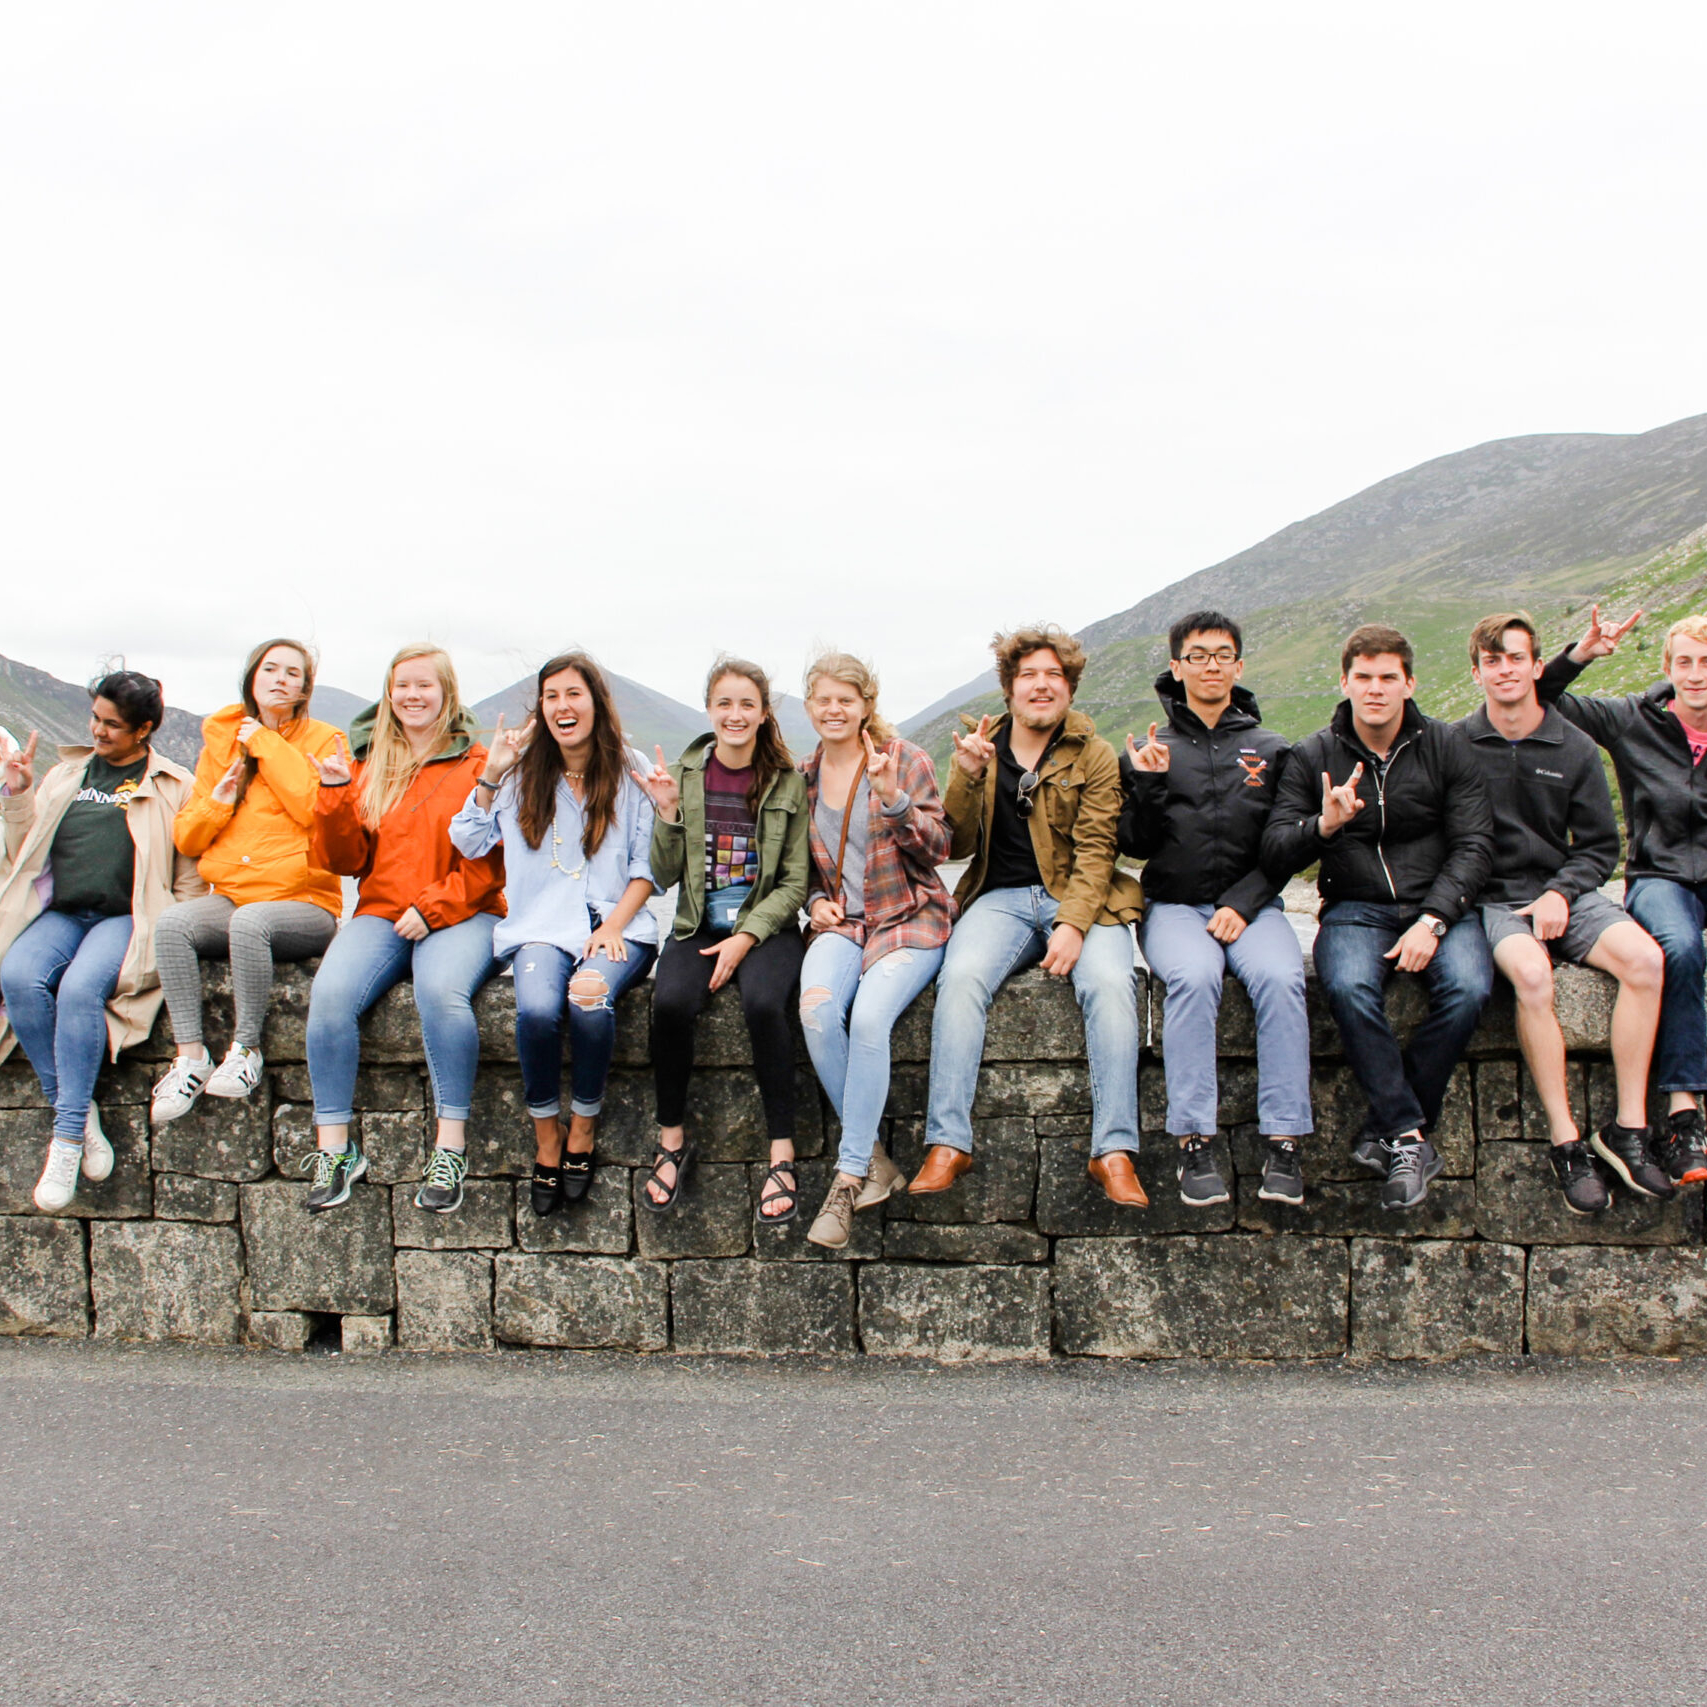 Study abroad students sit on a stone wall, smiling with horns up hand signal